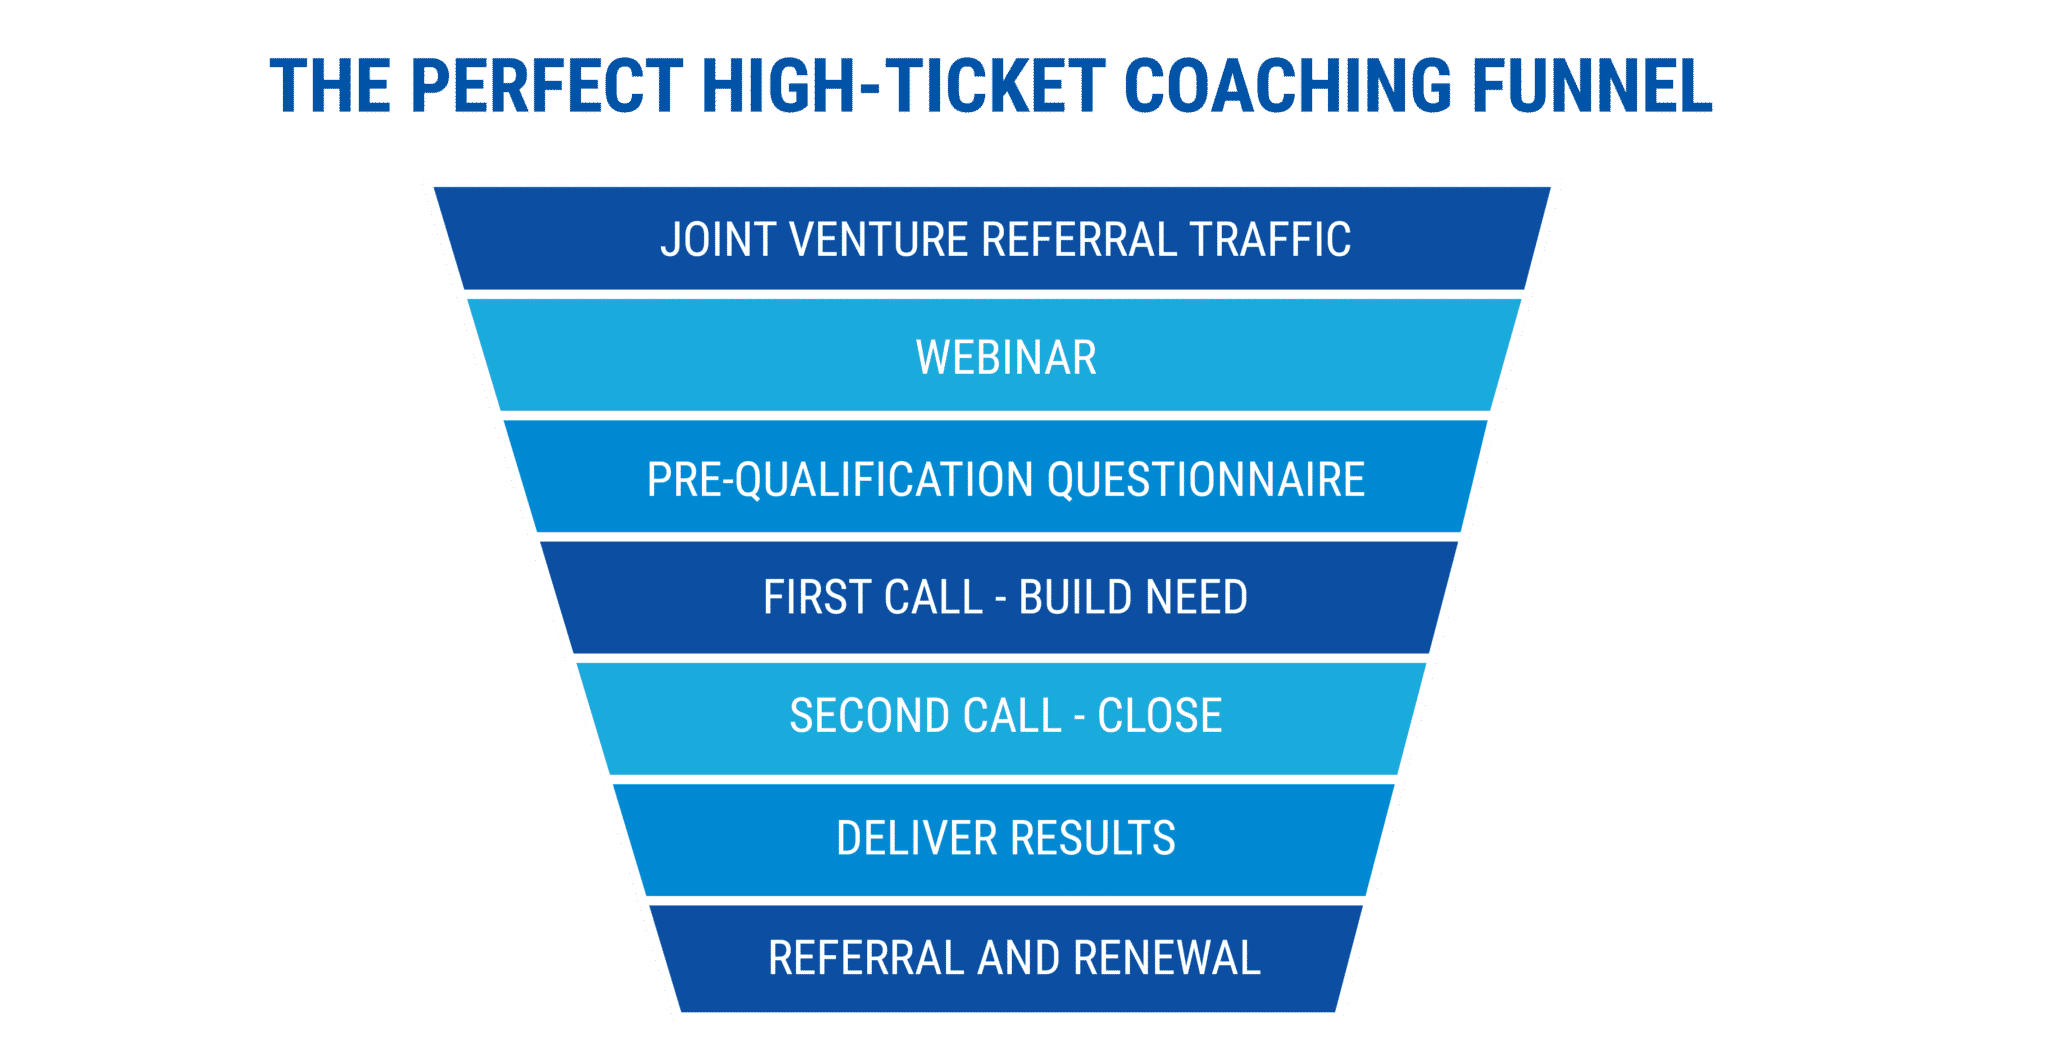 THE PERFECT HIGH-TICKET COACHING FUNNEL